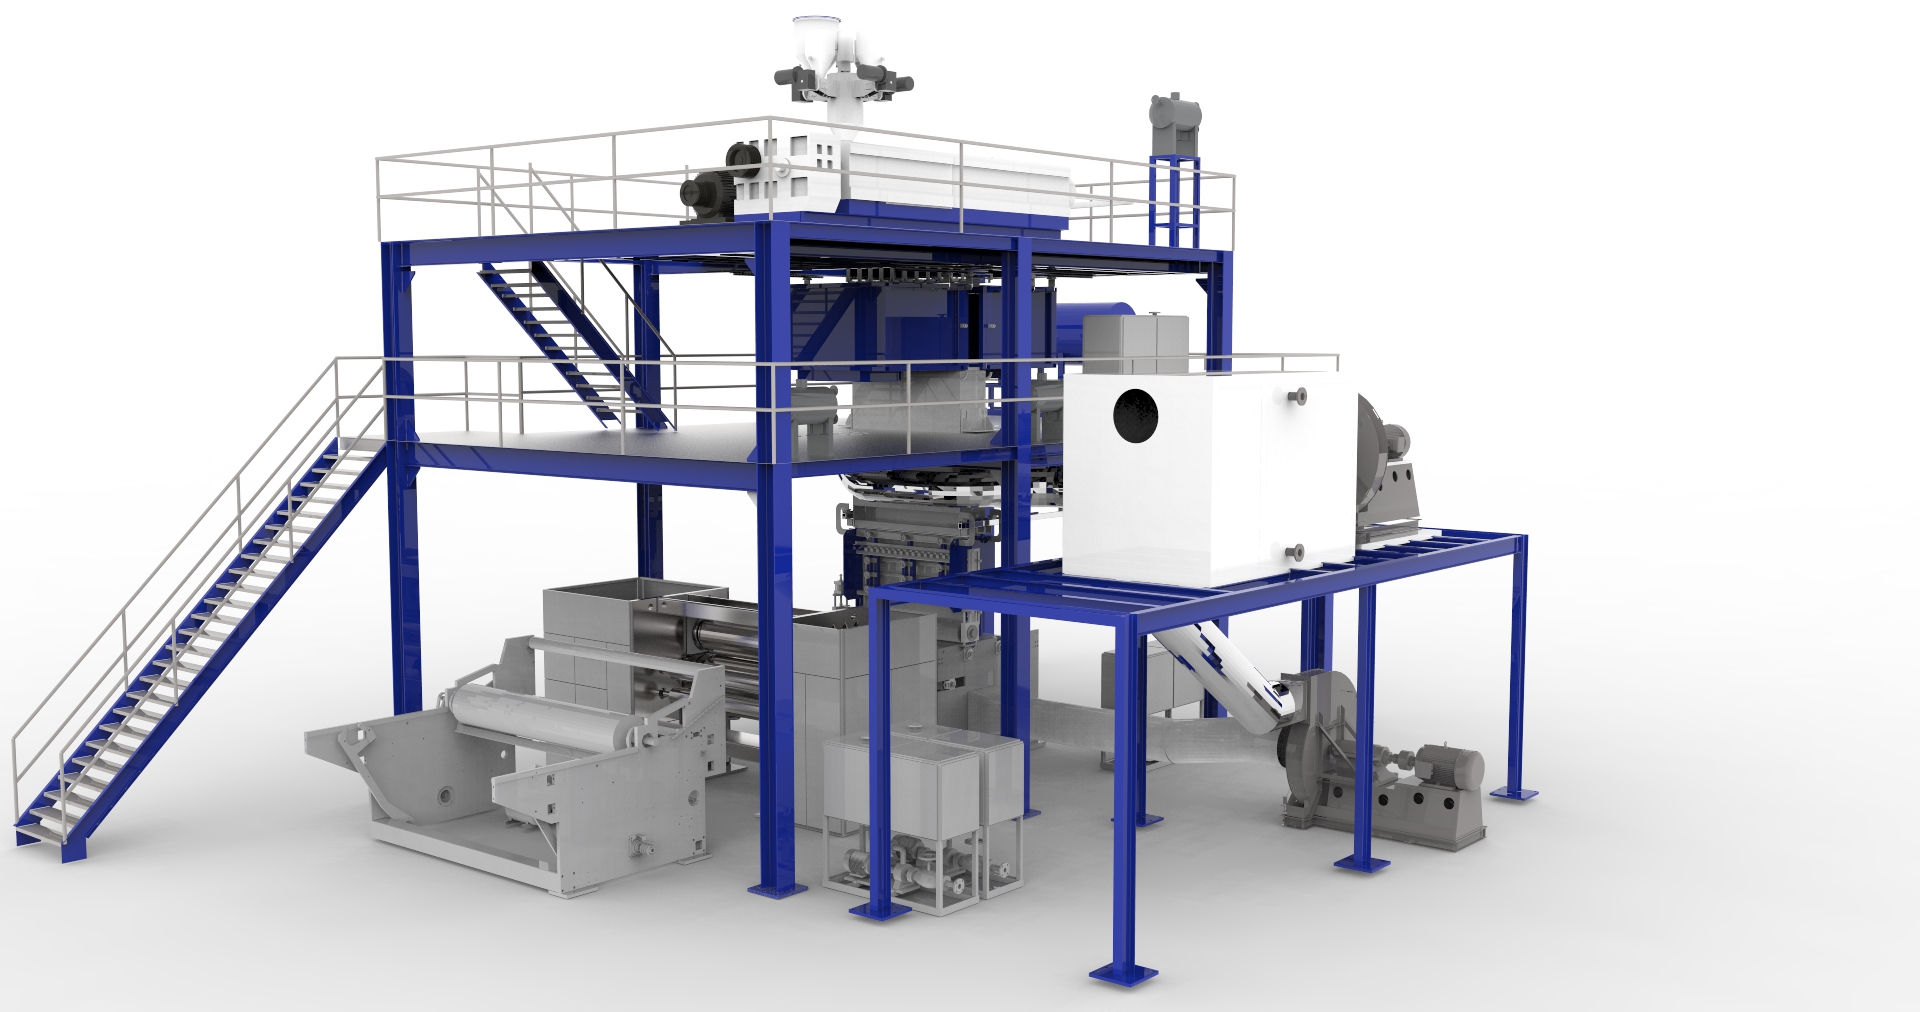 What is the role of the needle punching process of the non woven machine?